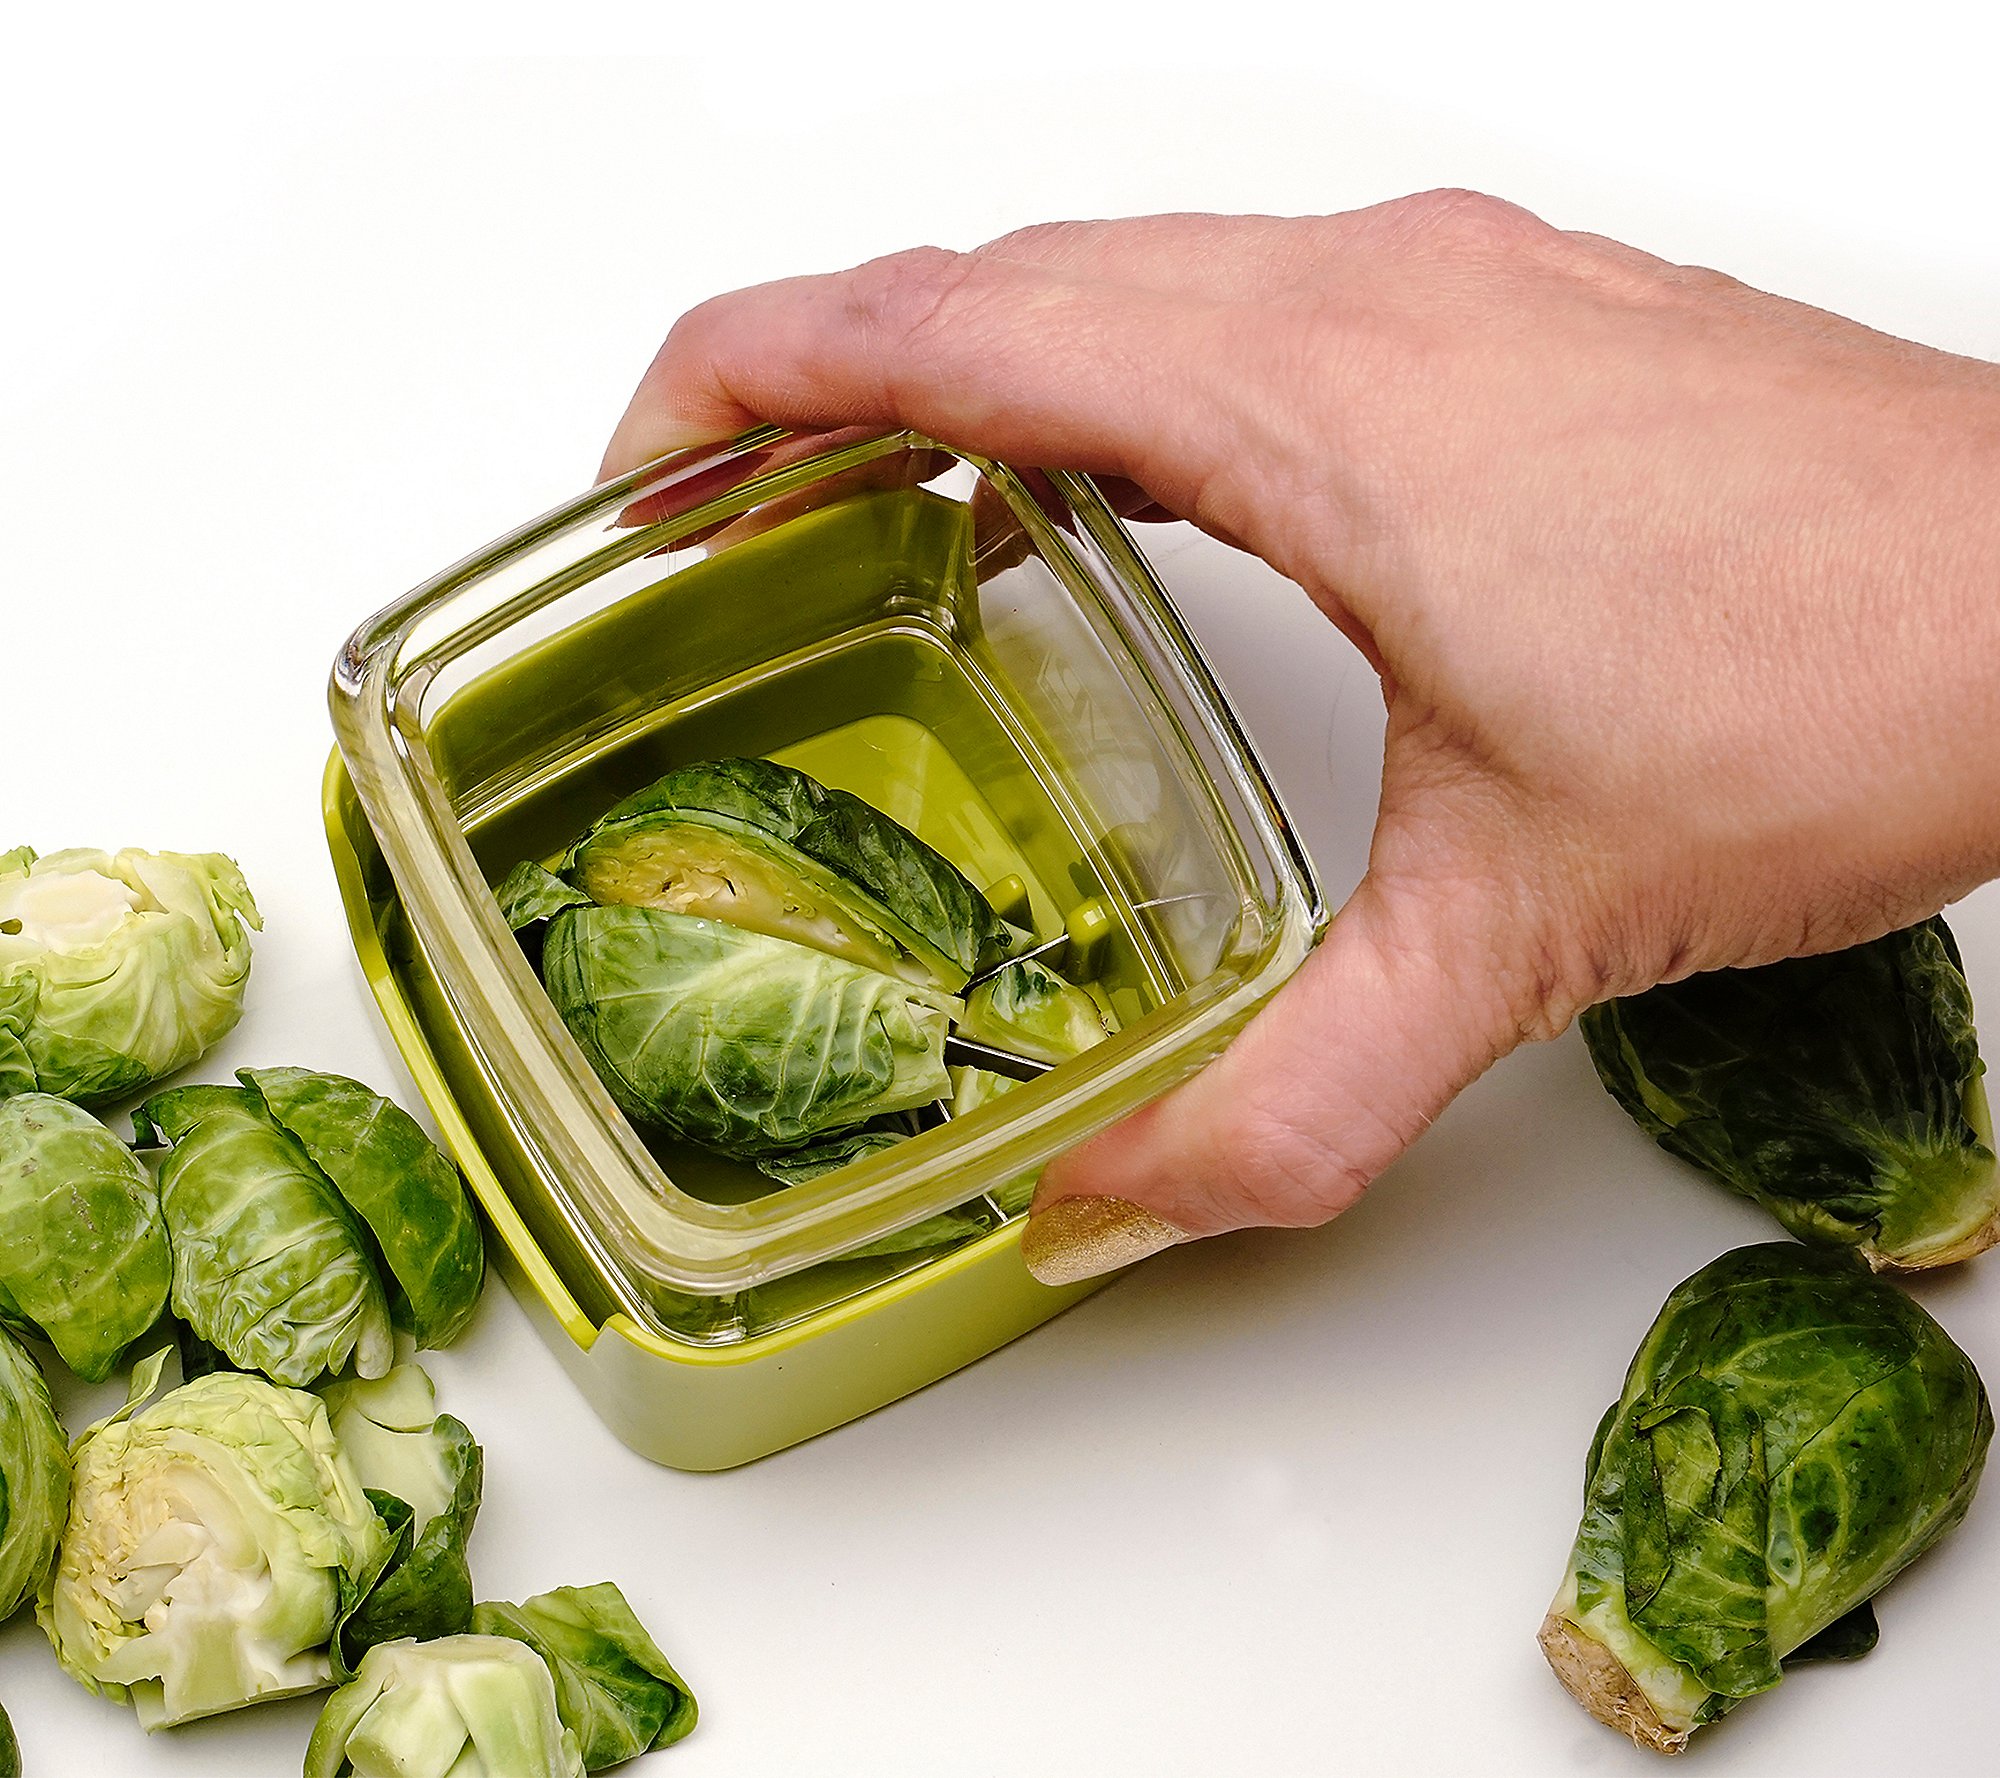 RSVP Brussel Sprout Prepping Tool